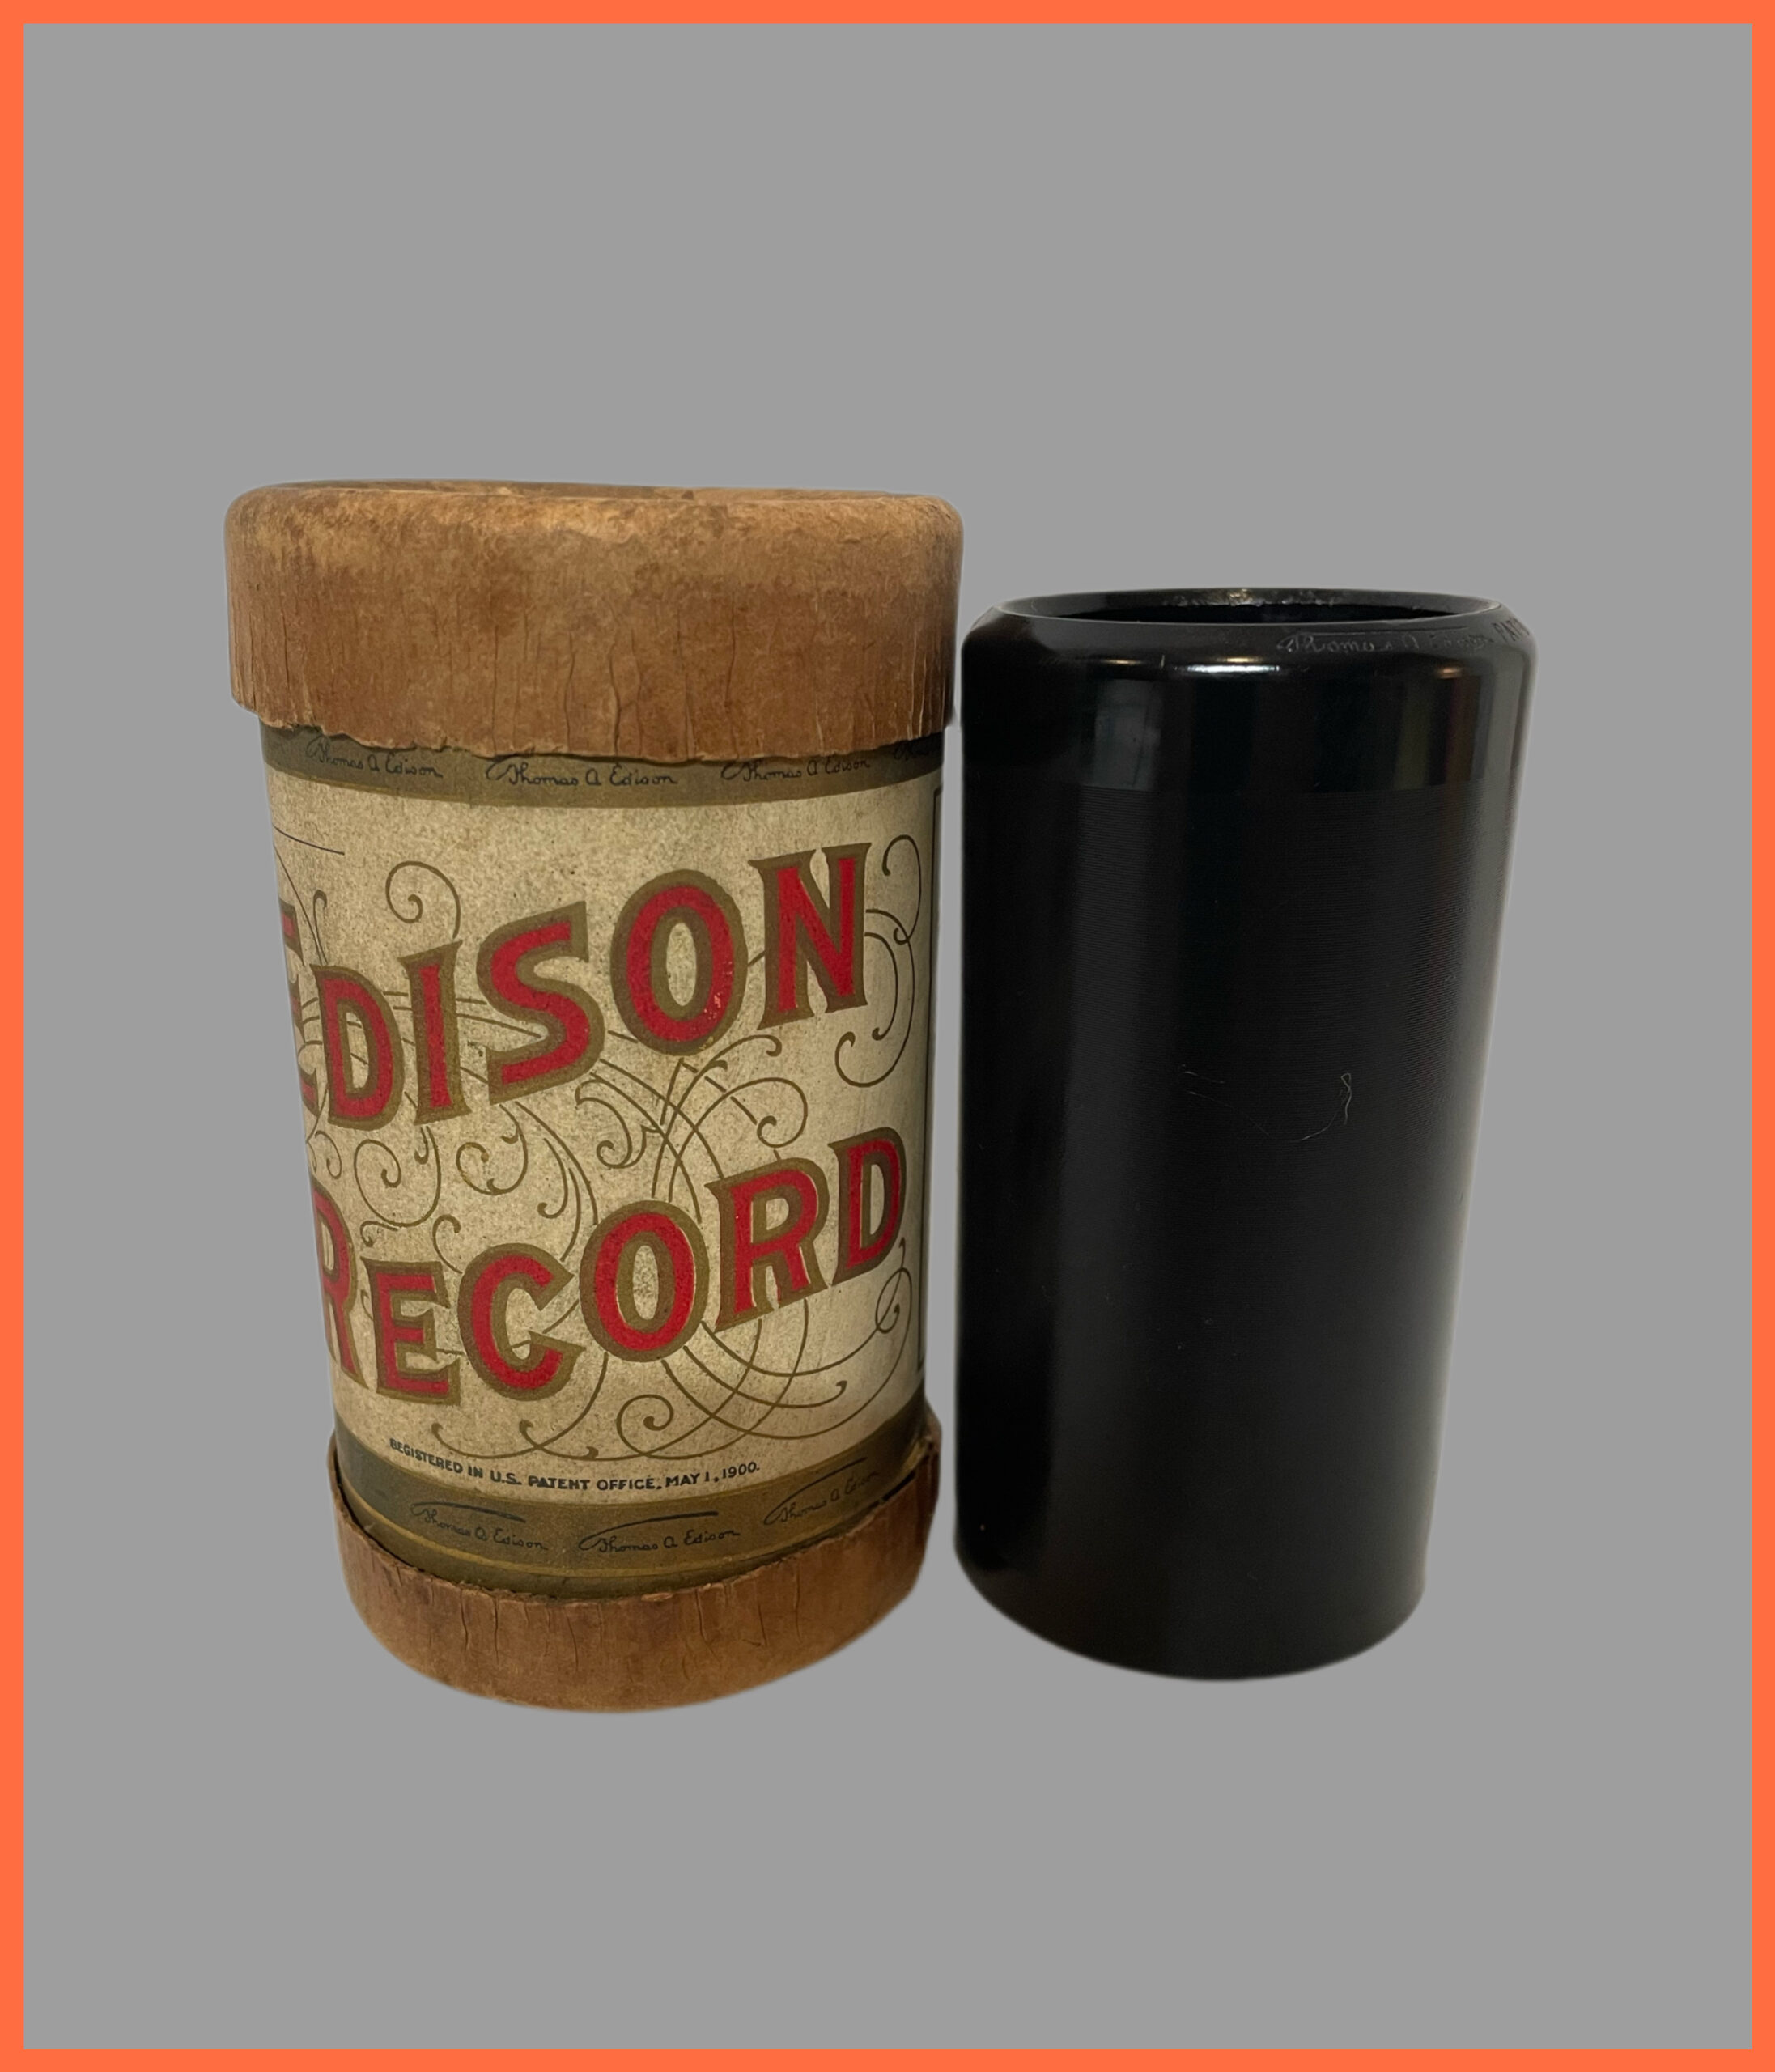 Edison 2-minute Cylinder…”Selva Negra” (Mexican)